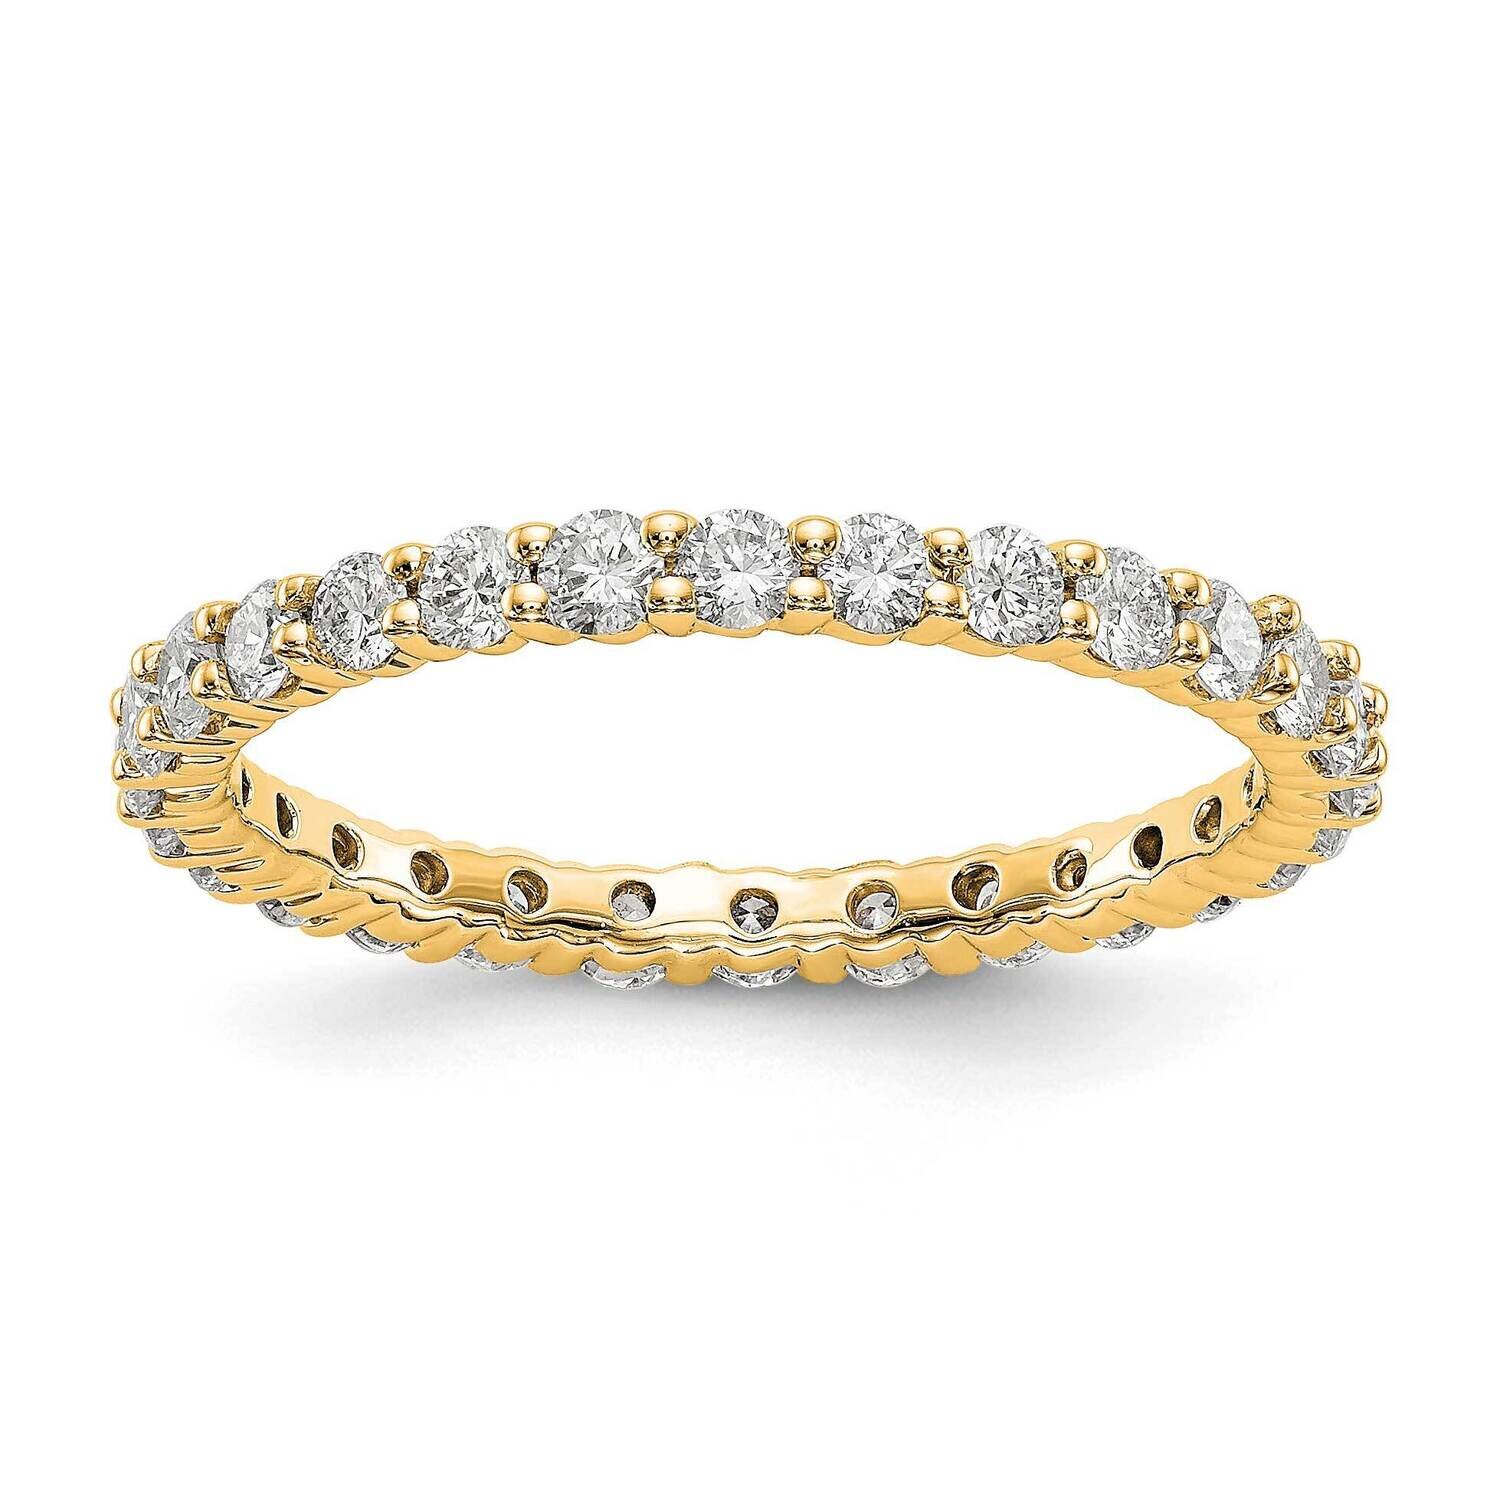 SI1/SI2 G H I Shared Prong Eternity Band 14k Yellow Gold Lab Grown Diamond ET0001-100-9YLG